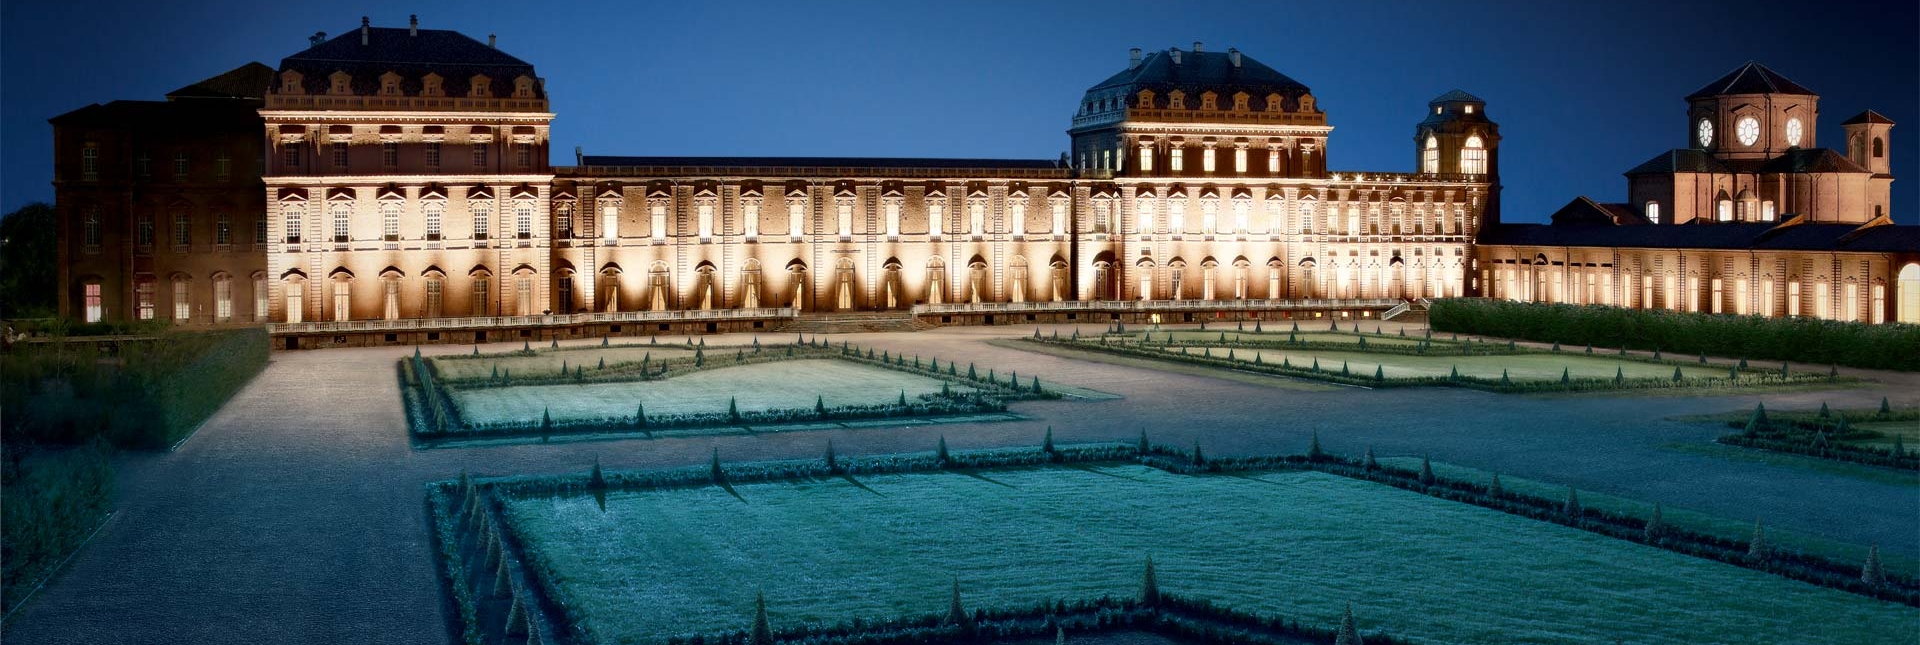 Grand Parterre at night